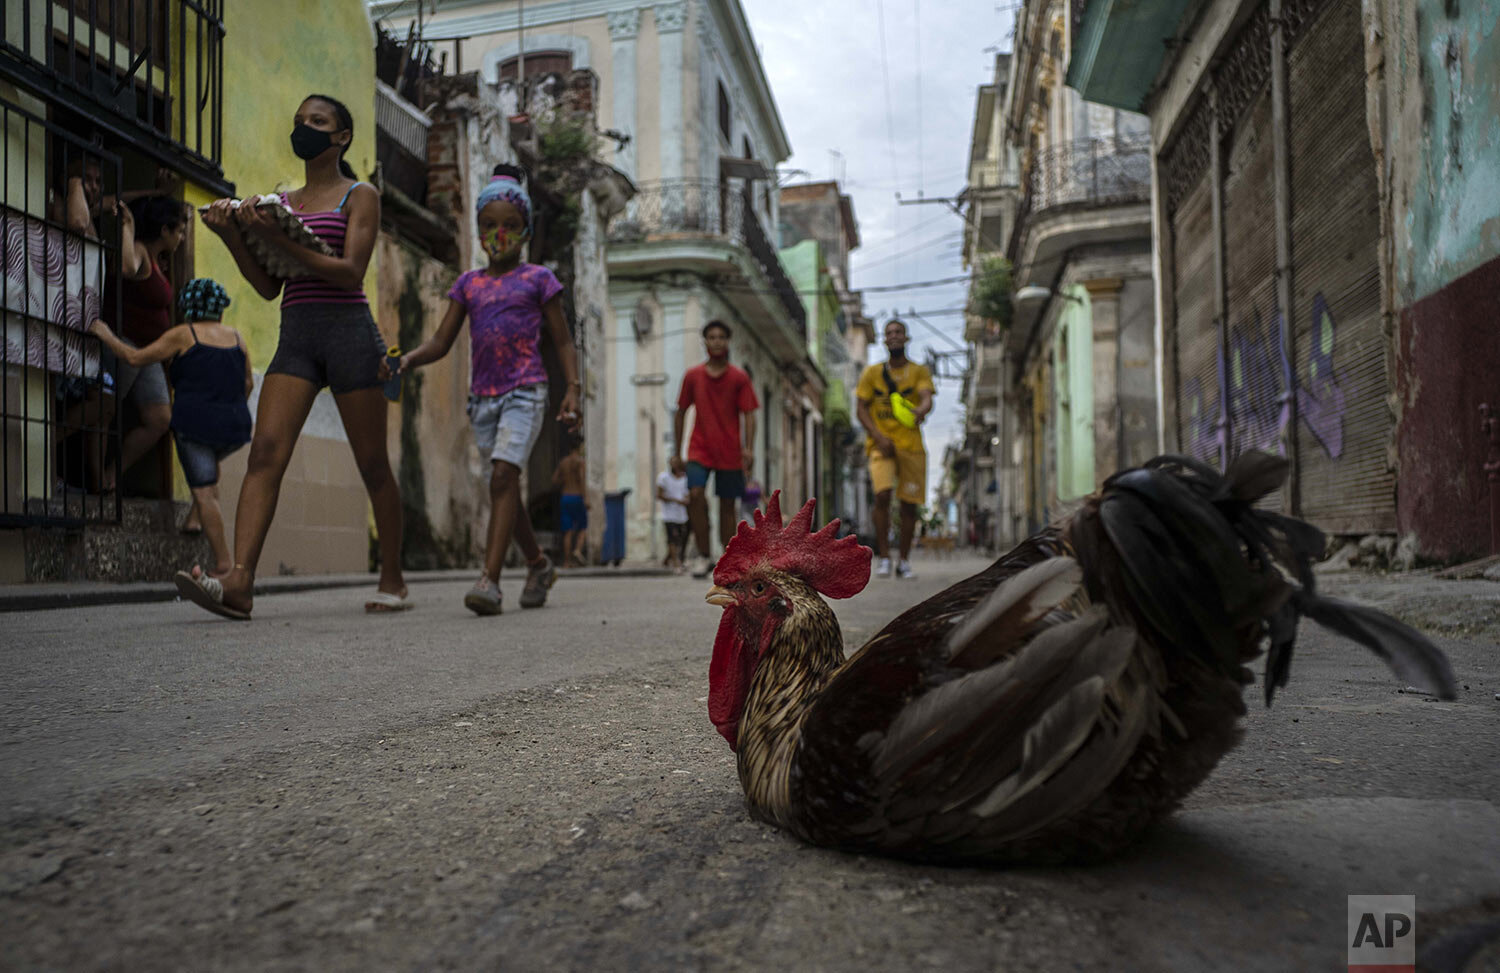  Pedestrians wearing face masks amid the new coronavirus pandemic walk past a rooster named "Espartaco," or Spartacus, sitting in the middle of a street in Havana, Cuba, Oct. 27, 2020. (AP Photo/Ramon Espinosa) 